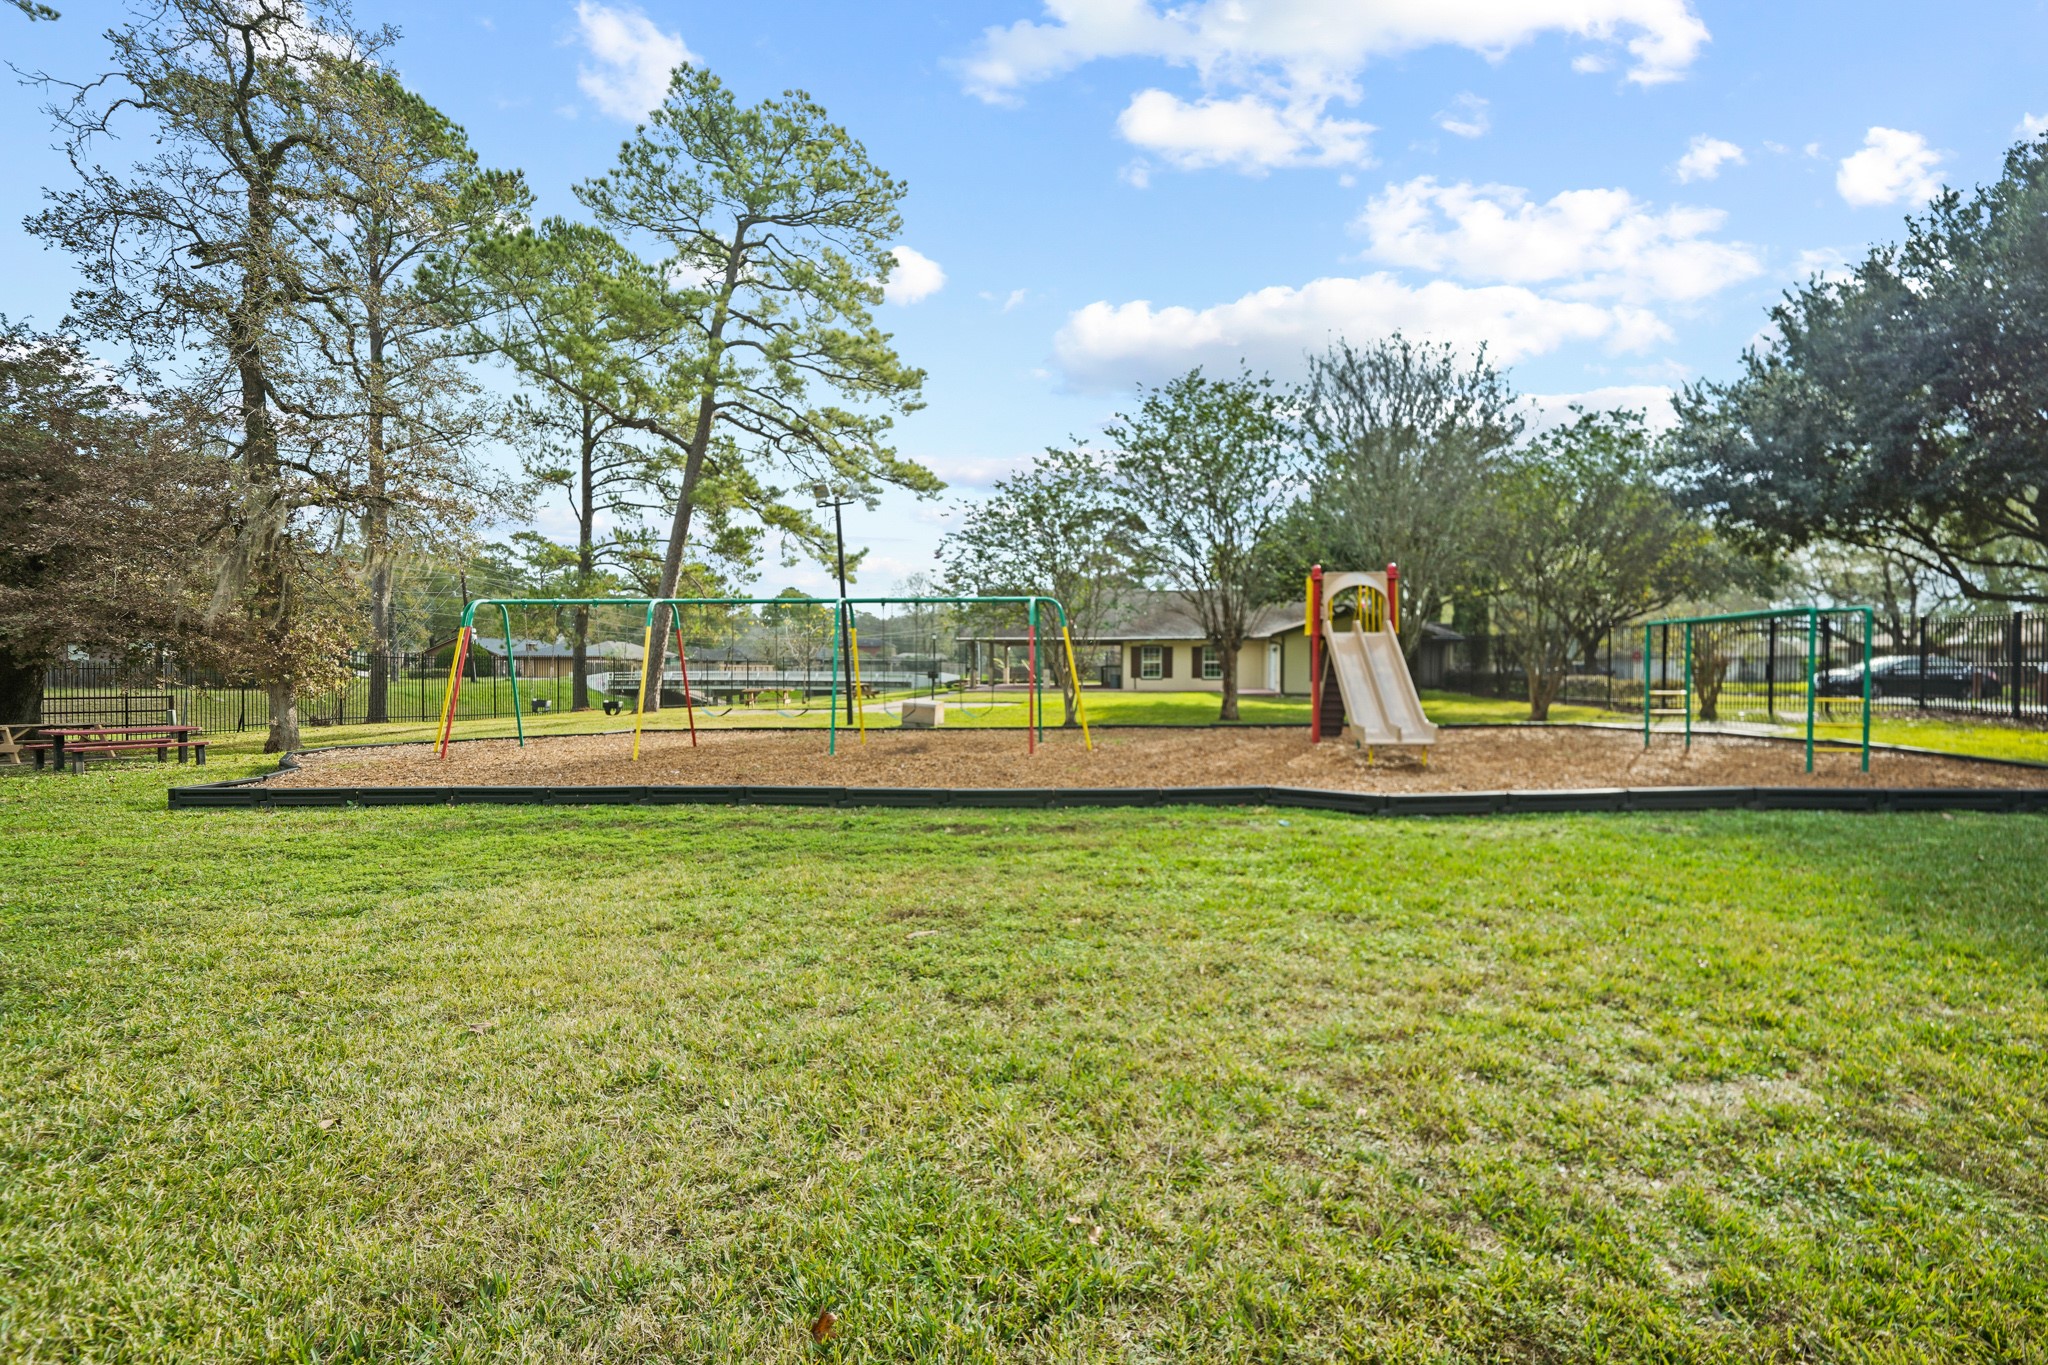 Take another peek at the neighborhood park. What a great place to meet and play with neighborhood friends.